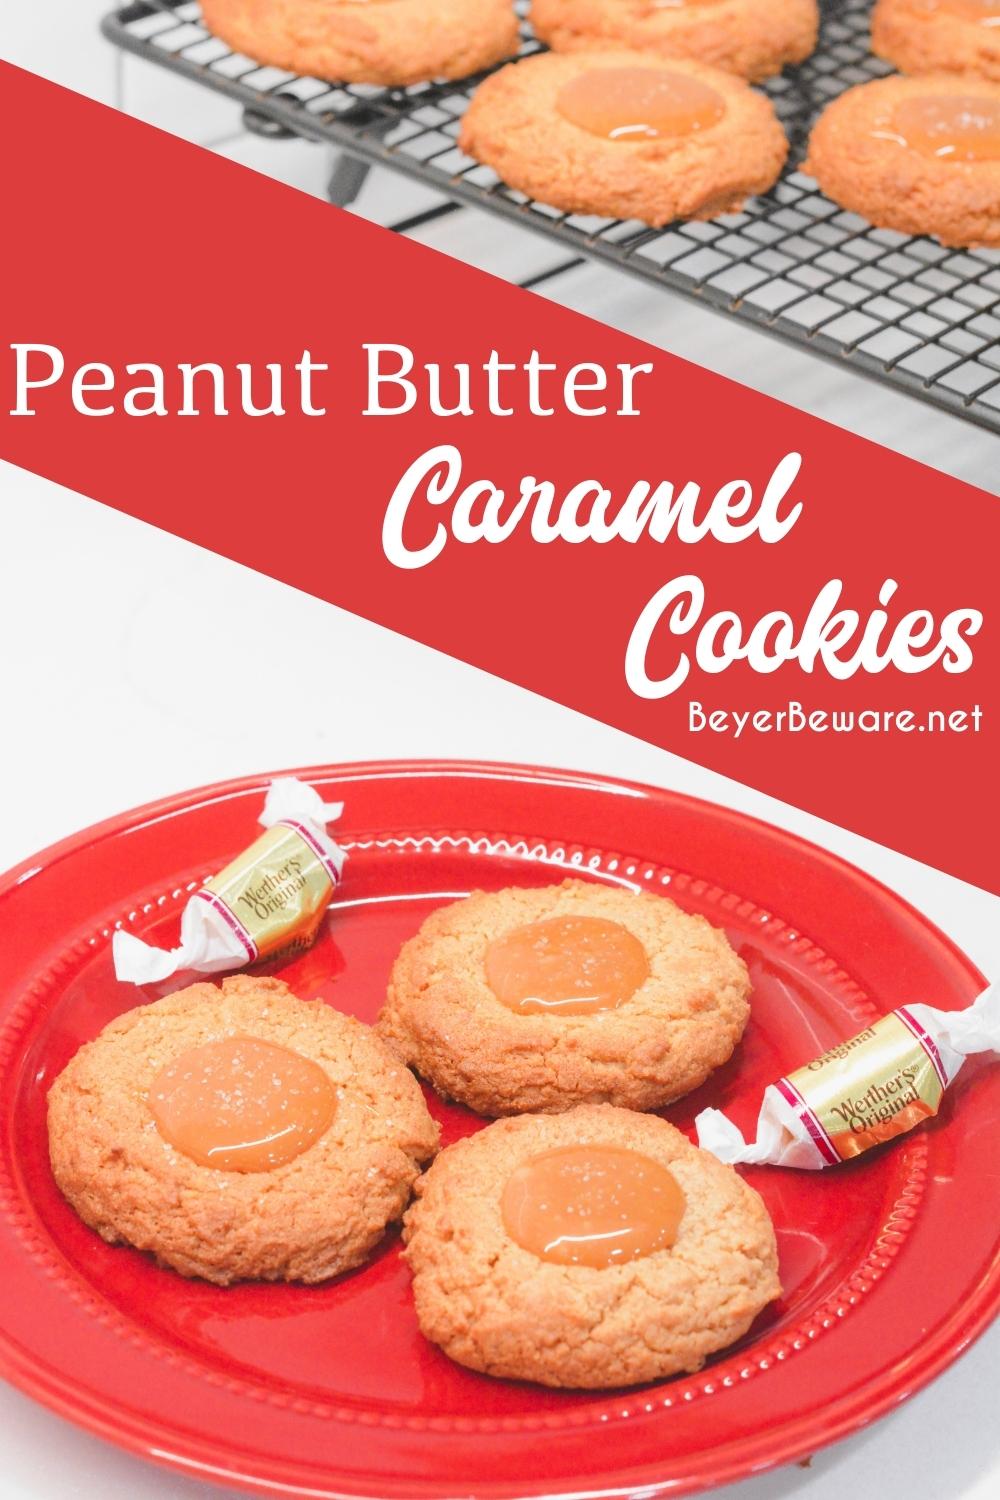 Peanut Butter caramel cookies are an easy non-chocolate Christmas cookie recipe that is easy to make with a cookie mix for peanut butter blossoms with caramel.